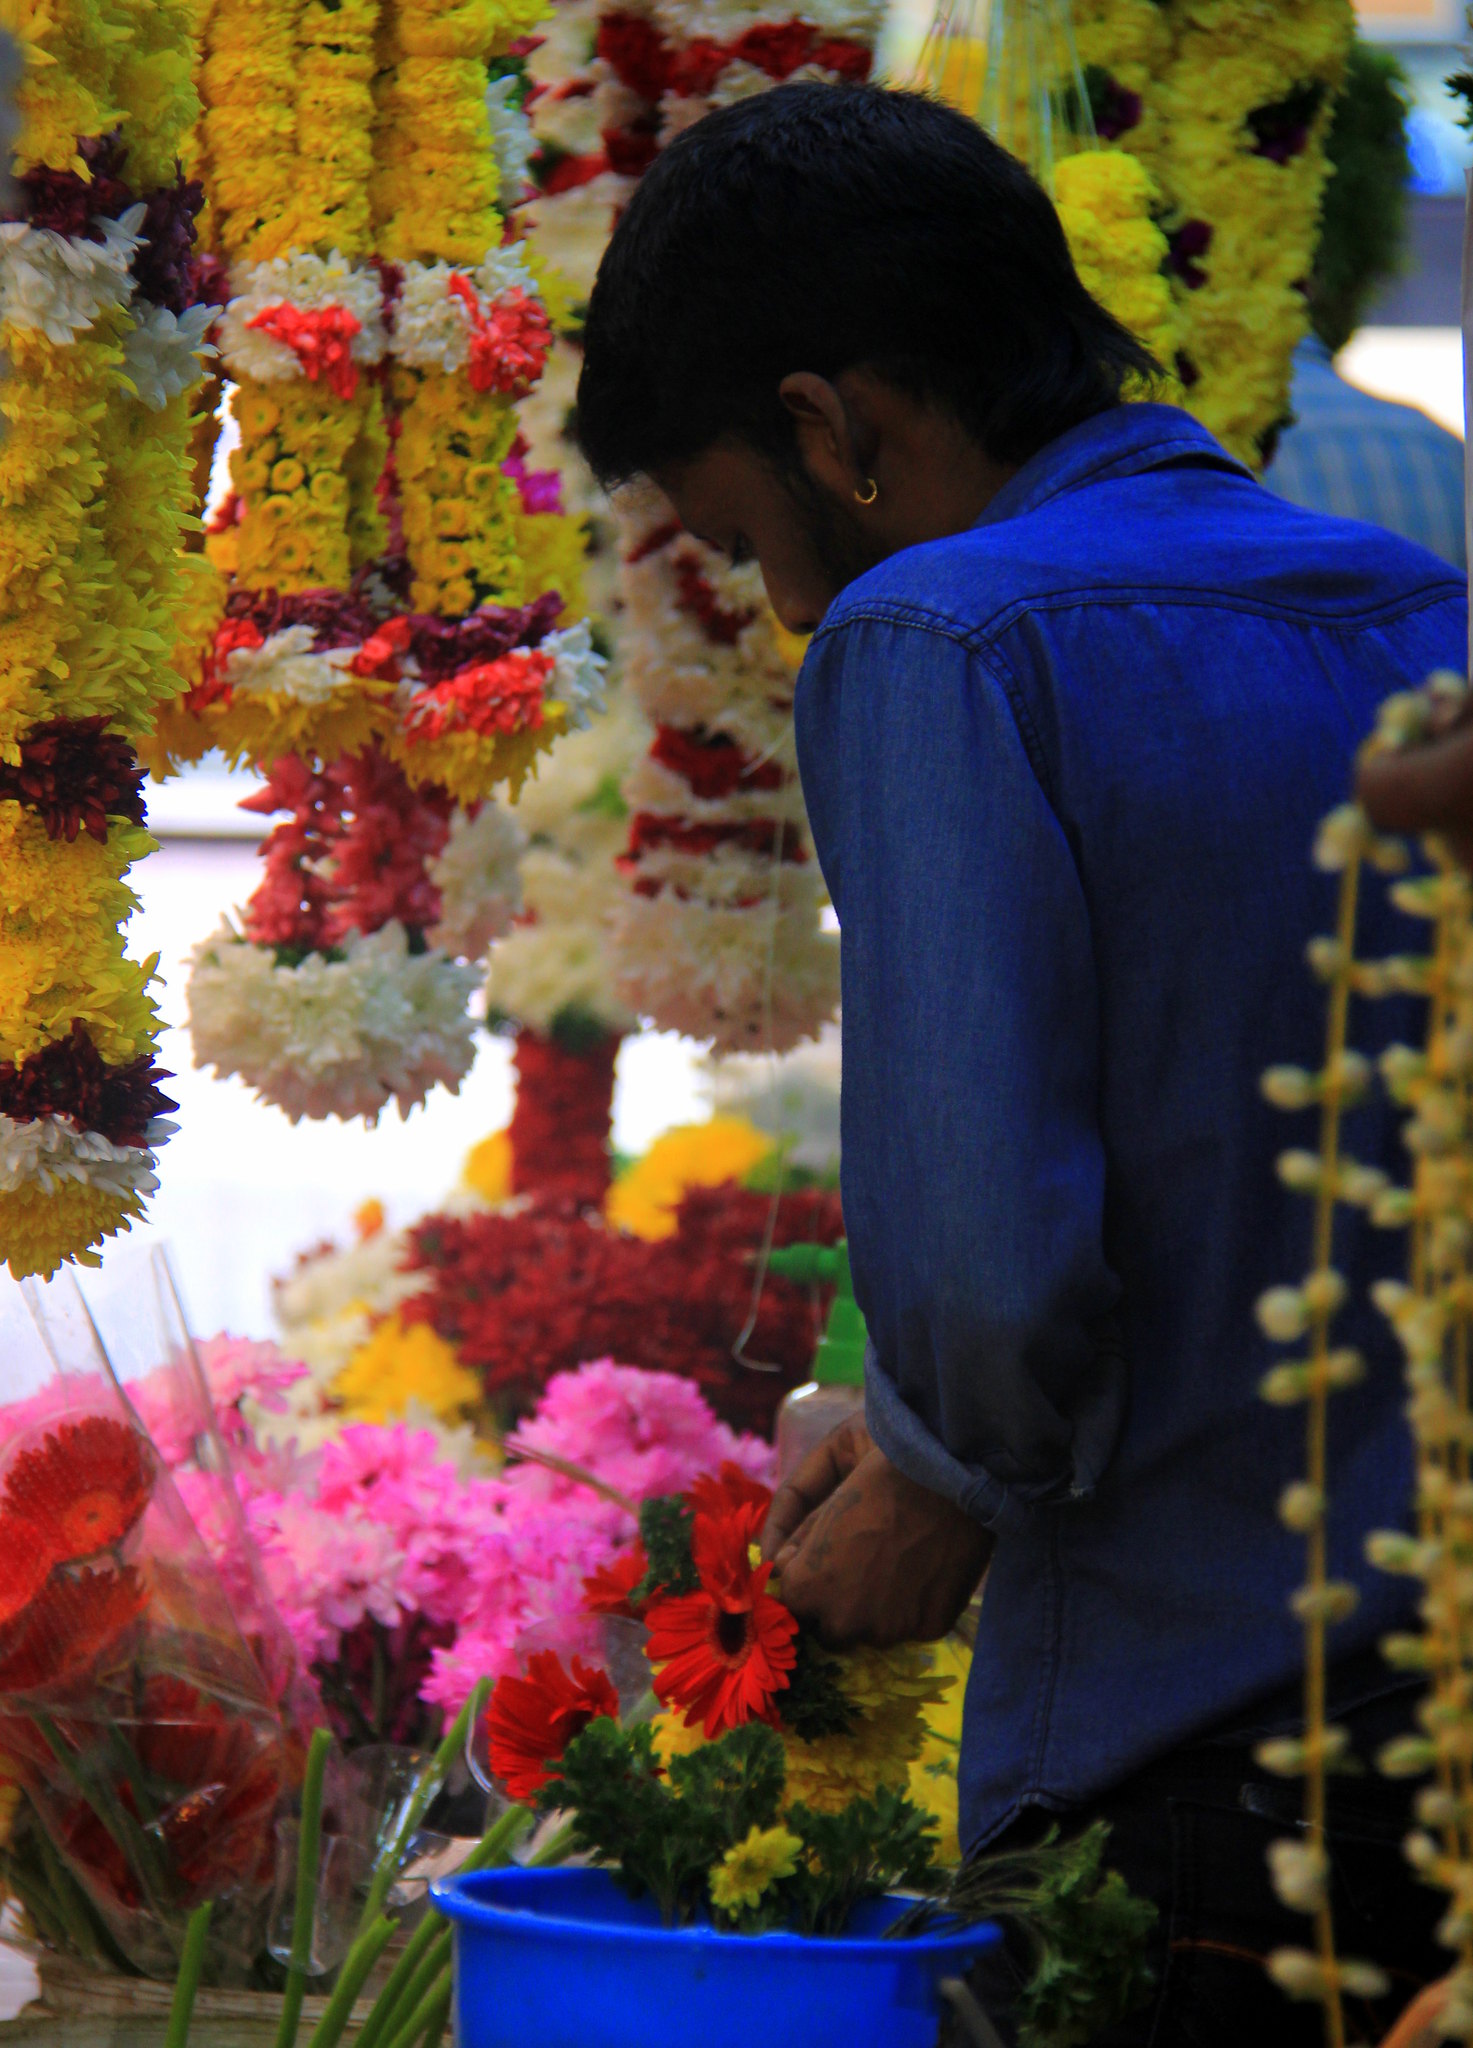 Flower sellers at Little India in KL